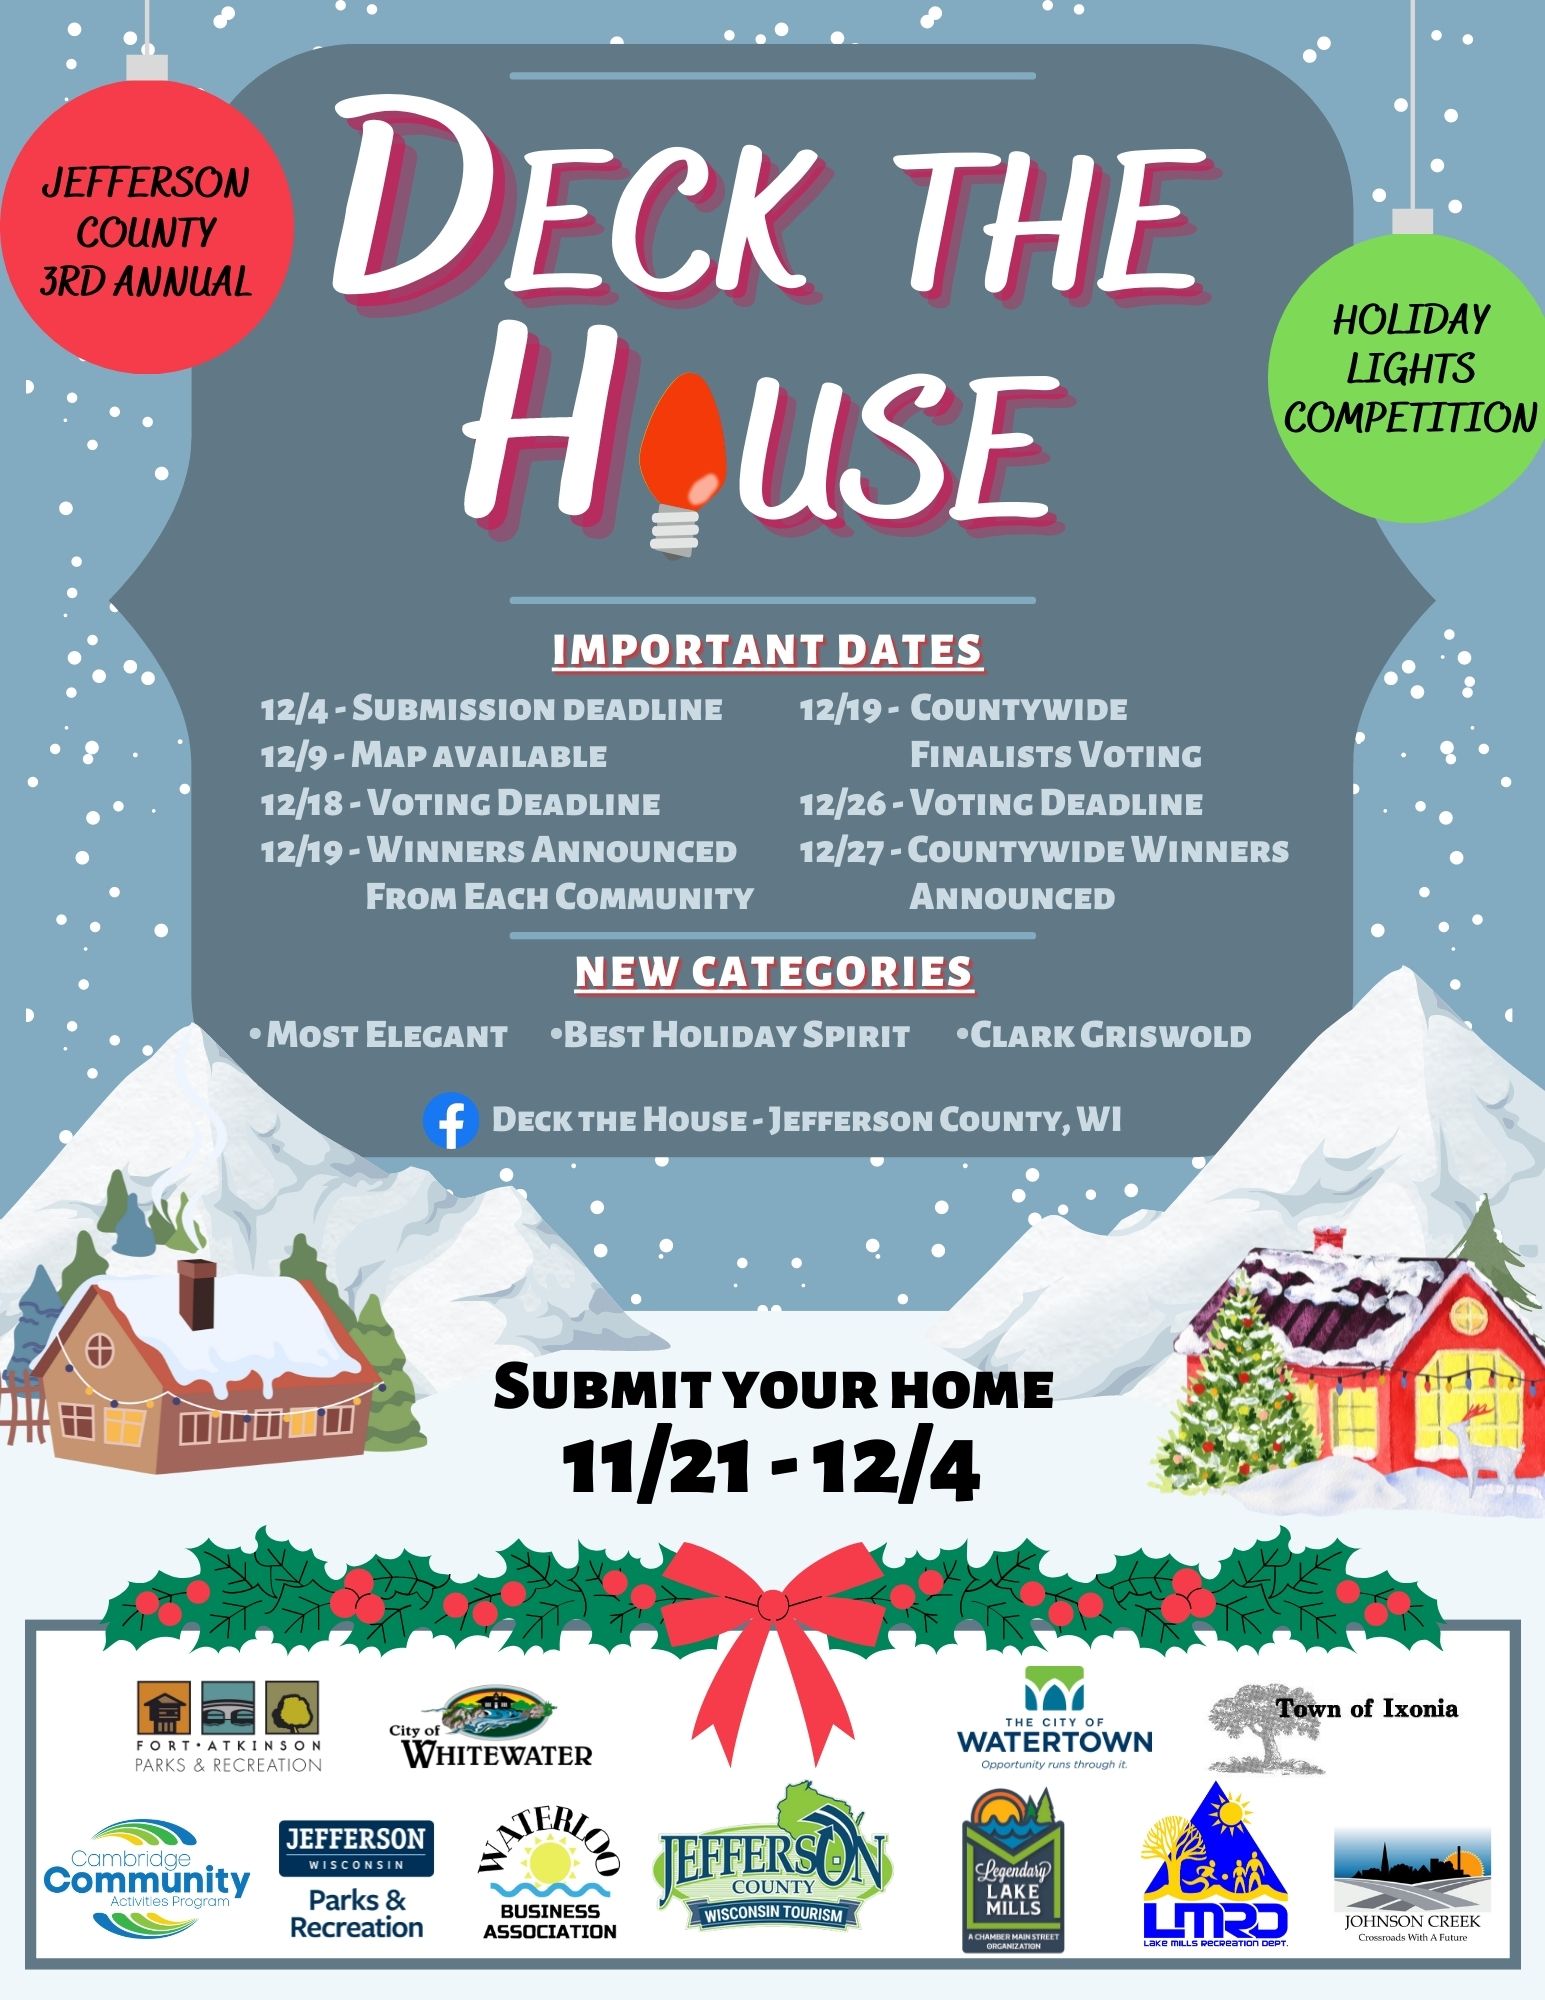 Deck the House